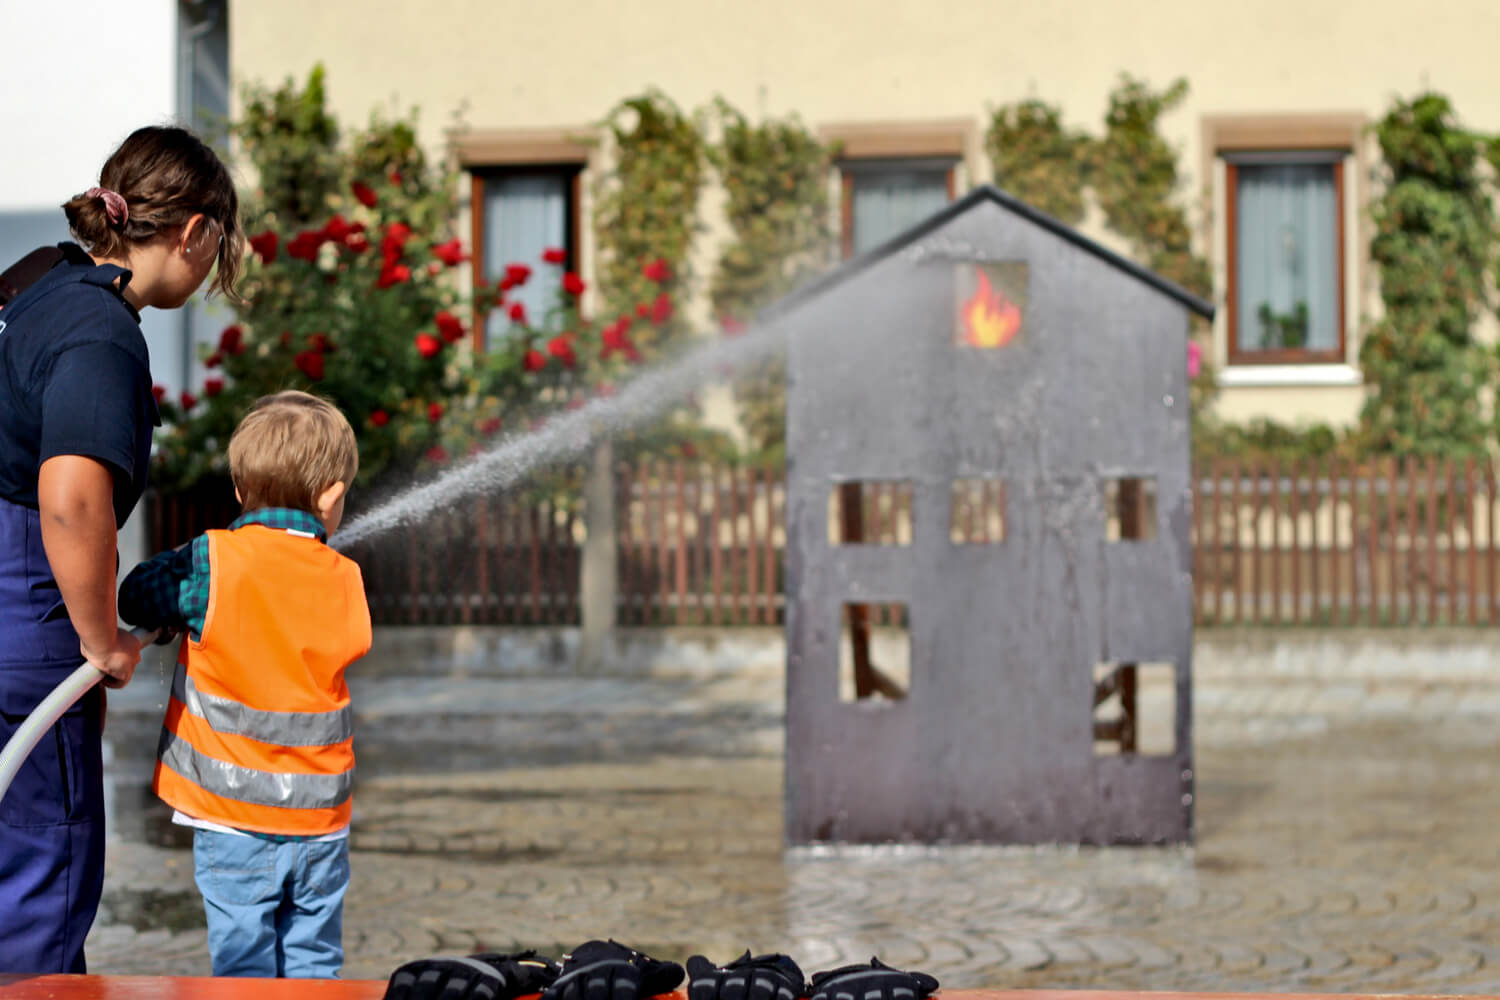 Fire Safety Tips For Kids